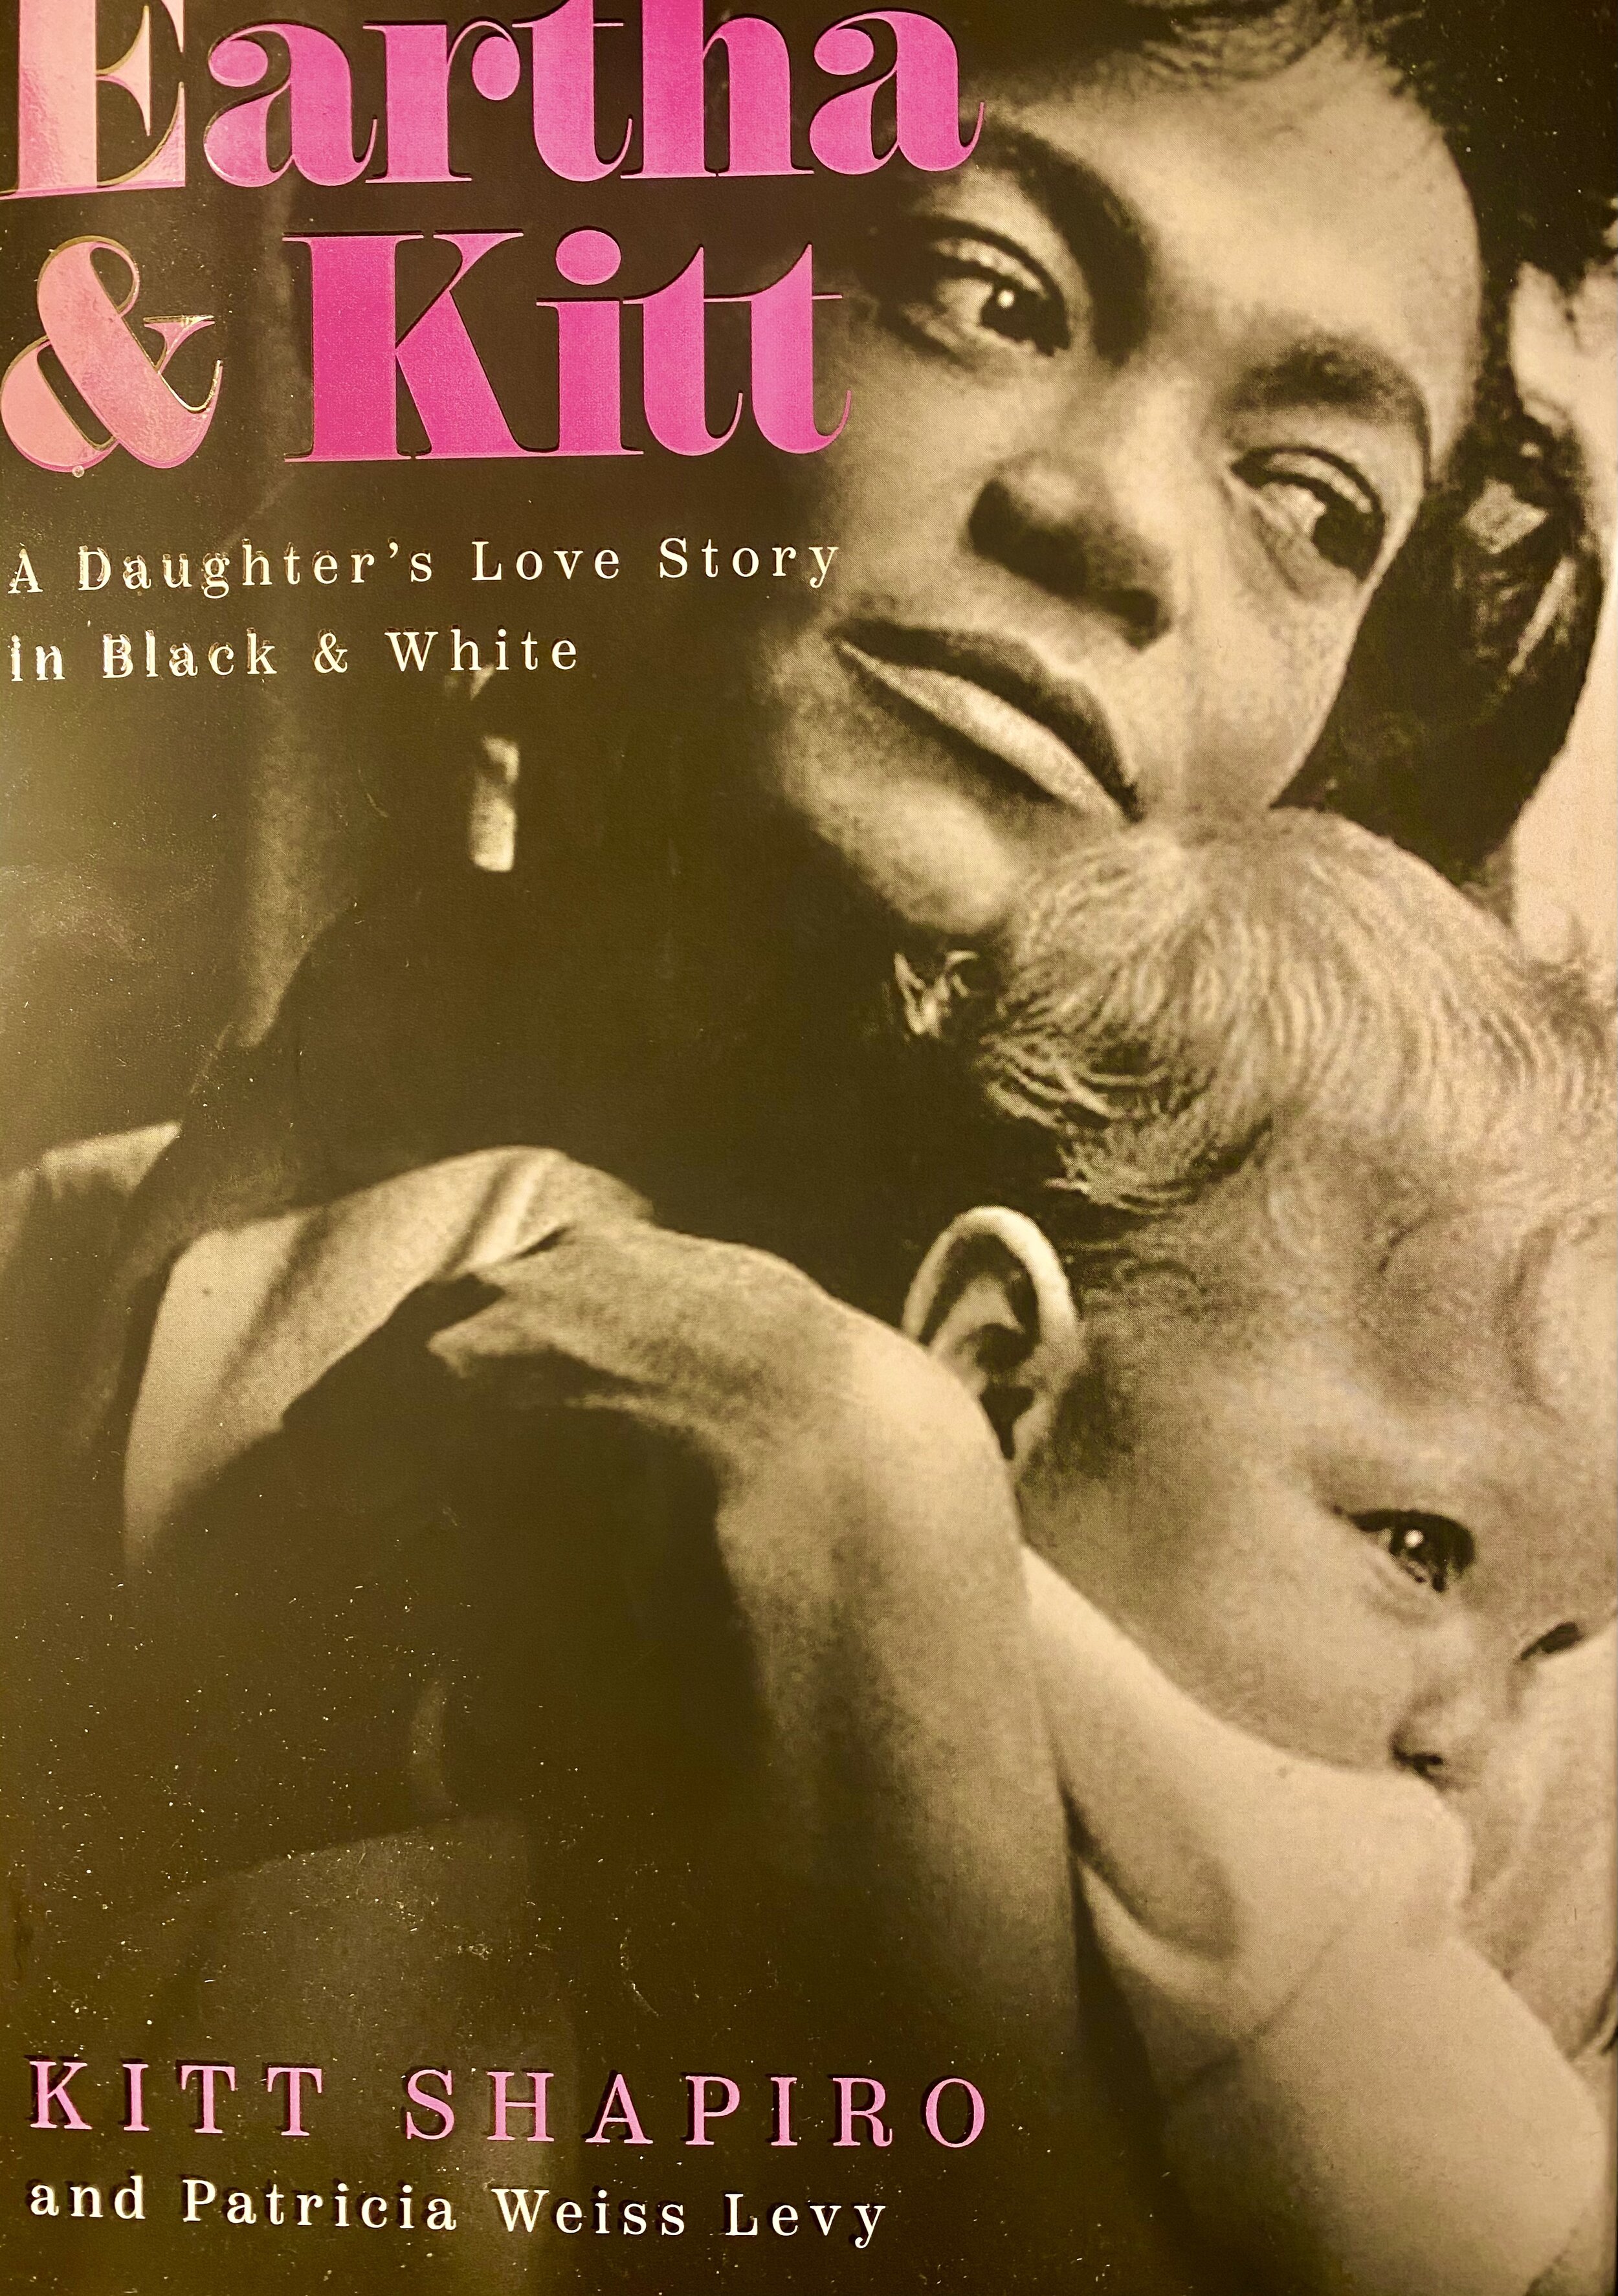 The Story You Didn't Know About Eartha Kitt's 'Santa Baby